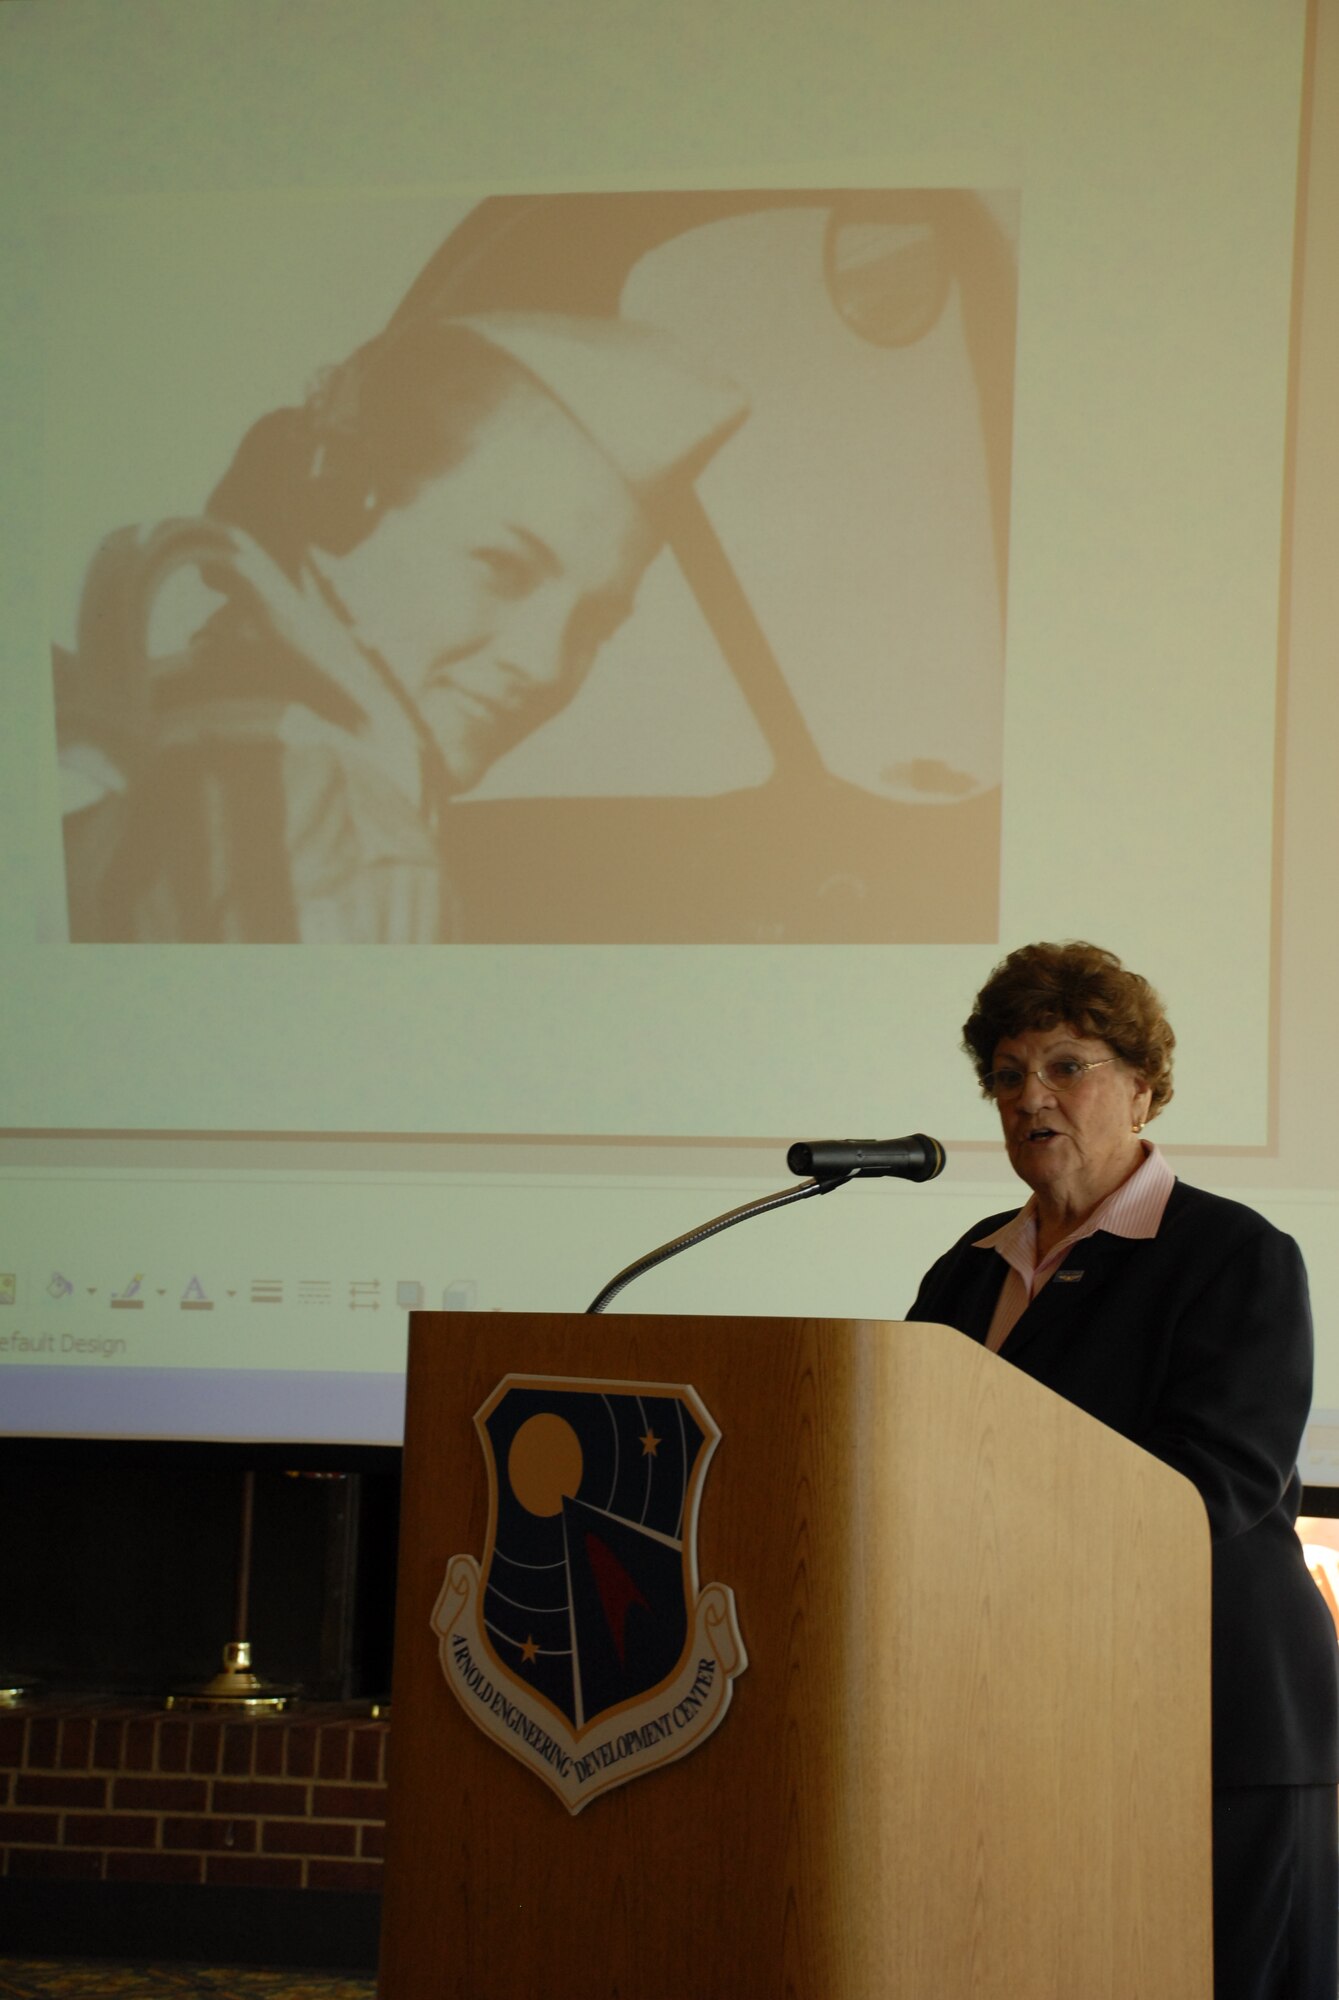 Margret Ringenberg speaks at the American Institute of Aeronautics and Astronautics lecture at the Arnold Lakeside Club at Arnold Air Force Base April 30. Mrs. Ringenberg served as a Women's Airforce Service Pilot during World War II. (Photo by Rick Goodfriend)